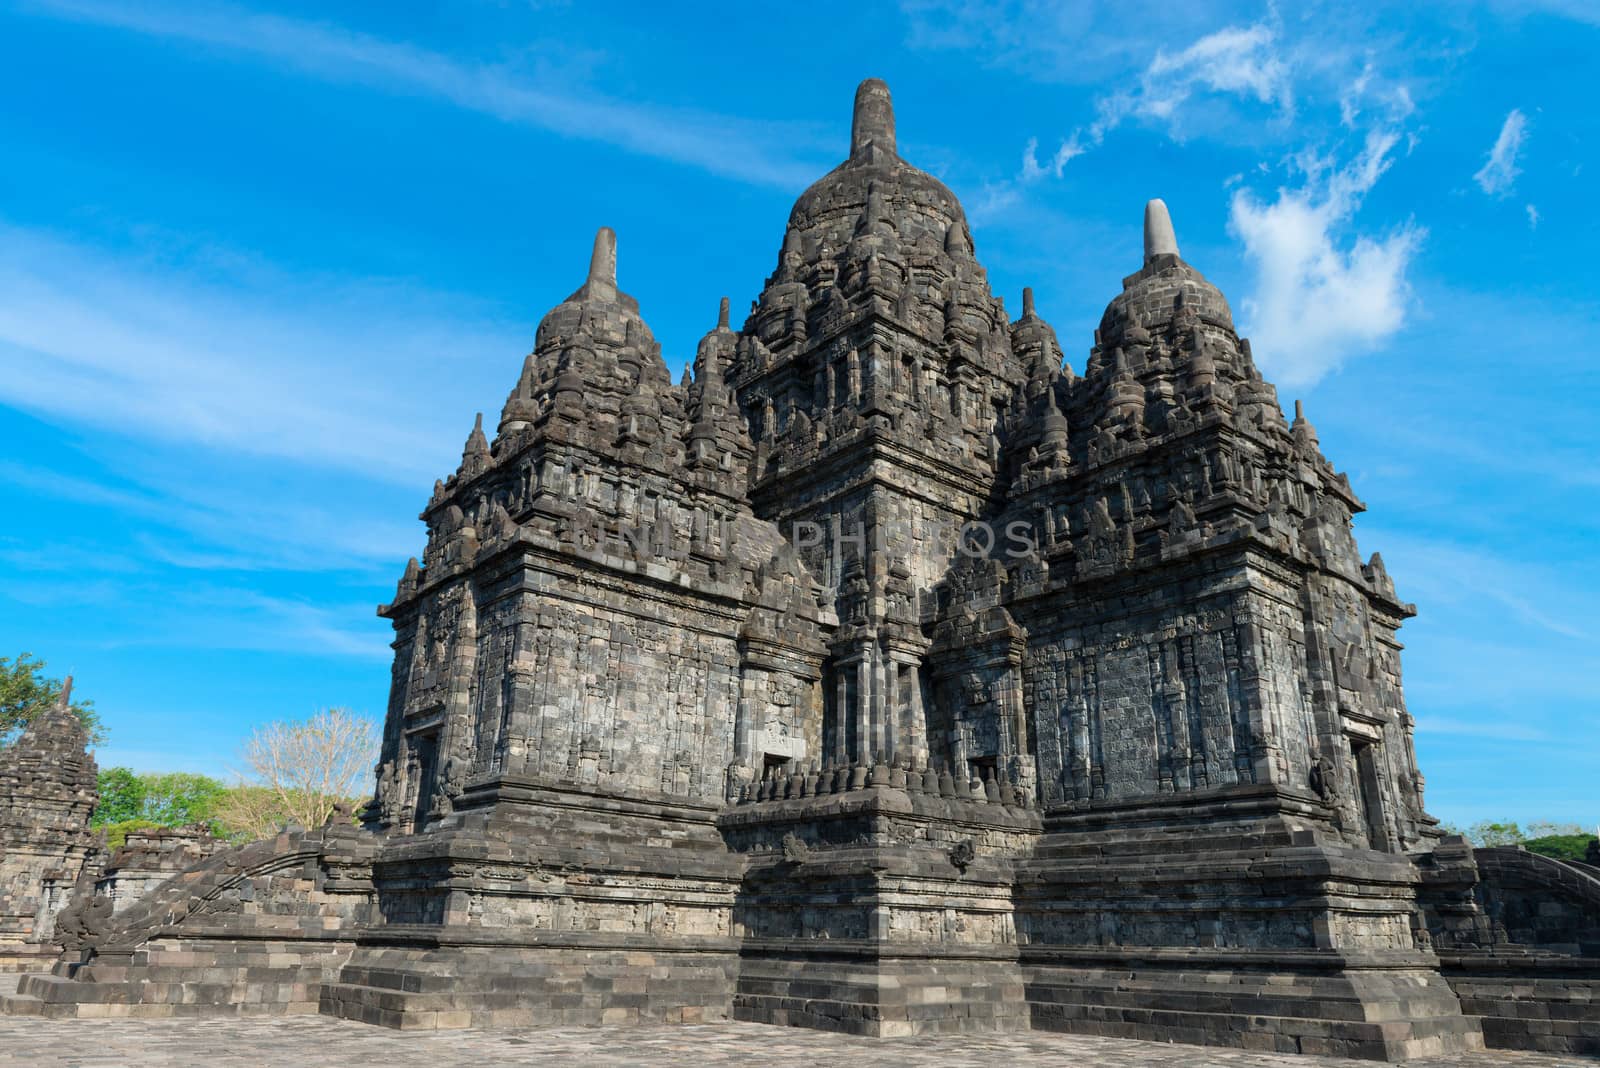 Main temple in Candi Sewu complex. Candi Sewu means 1000 temples, which links it to the legend of Loro Djonggrang. In fact this complex has 253 building structures (8th Century) and it is the second largest Buddhist temple in Java, Indonesia.